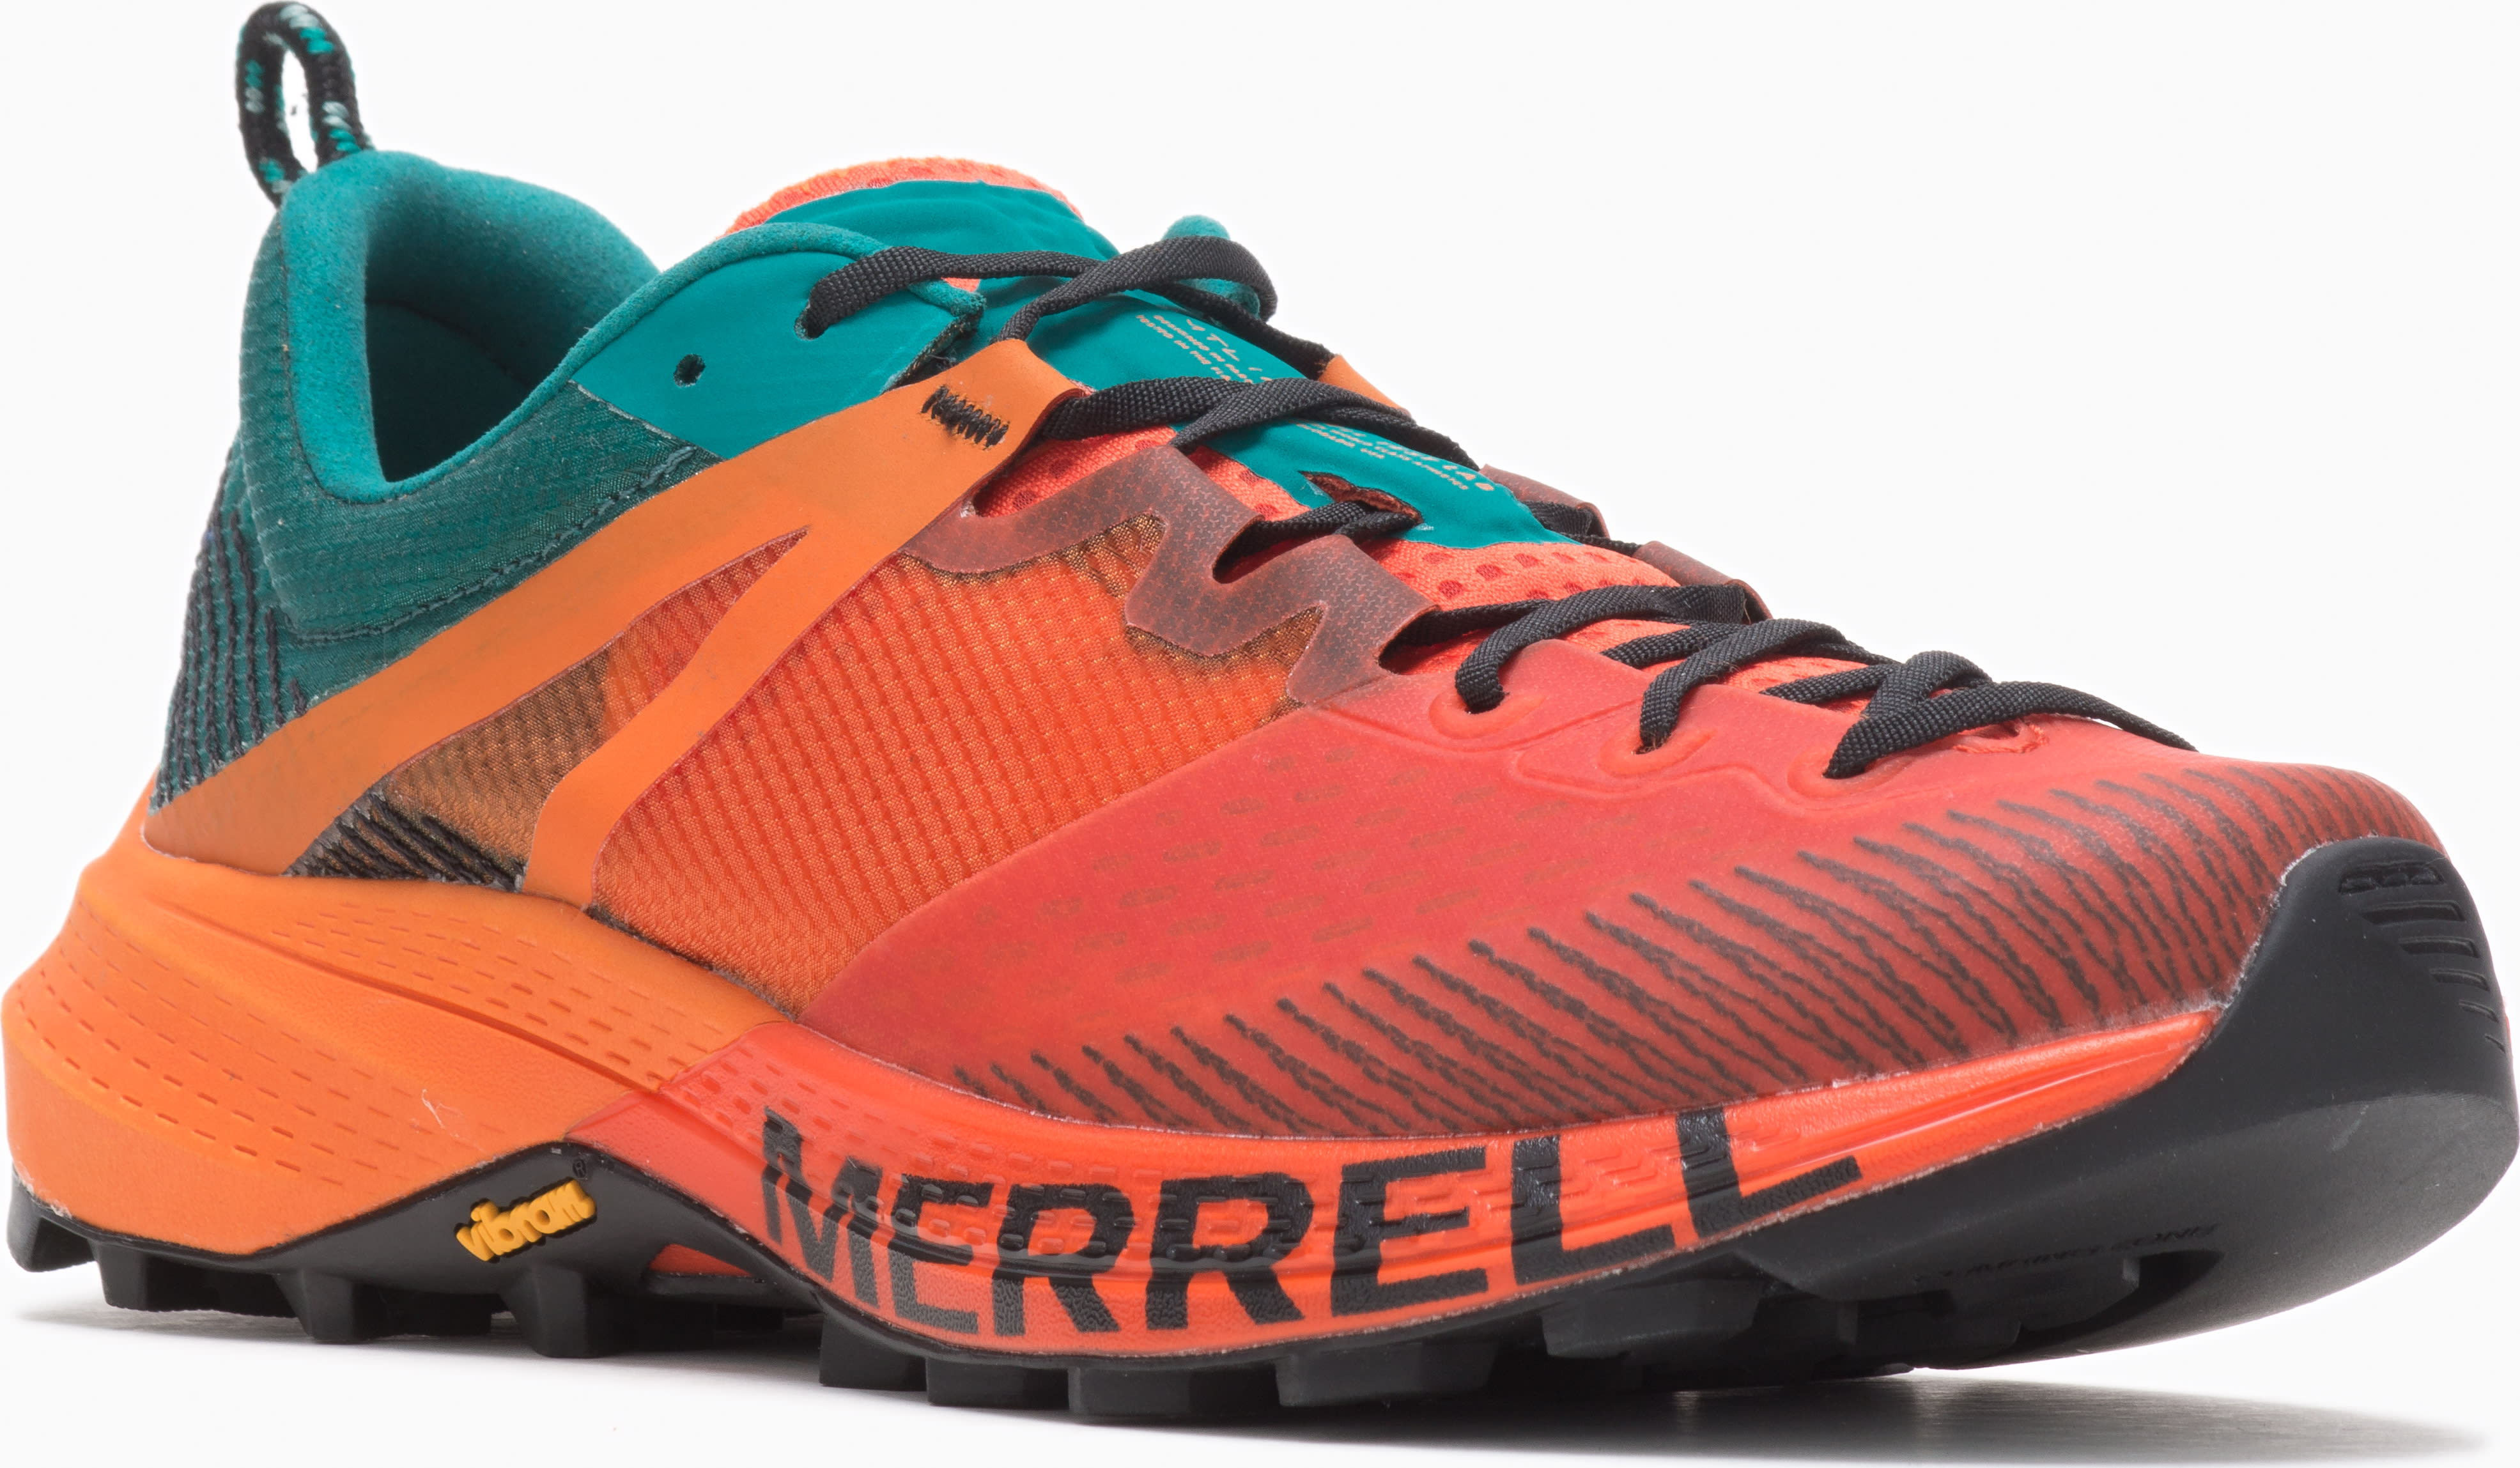 Buy Merrell Women's MTL MQM from Outnorth